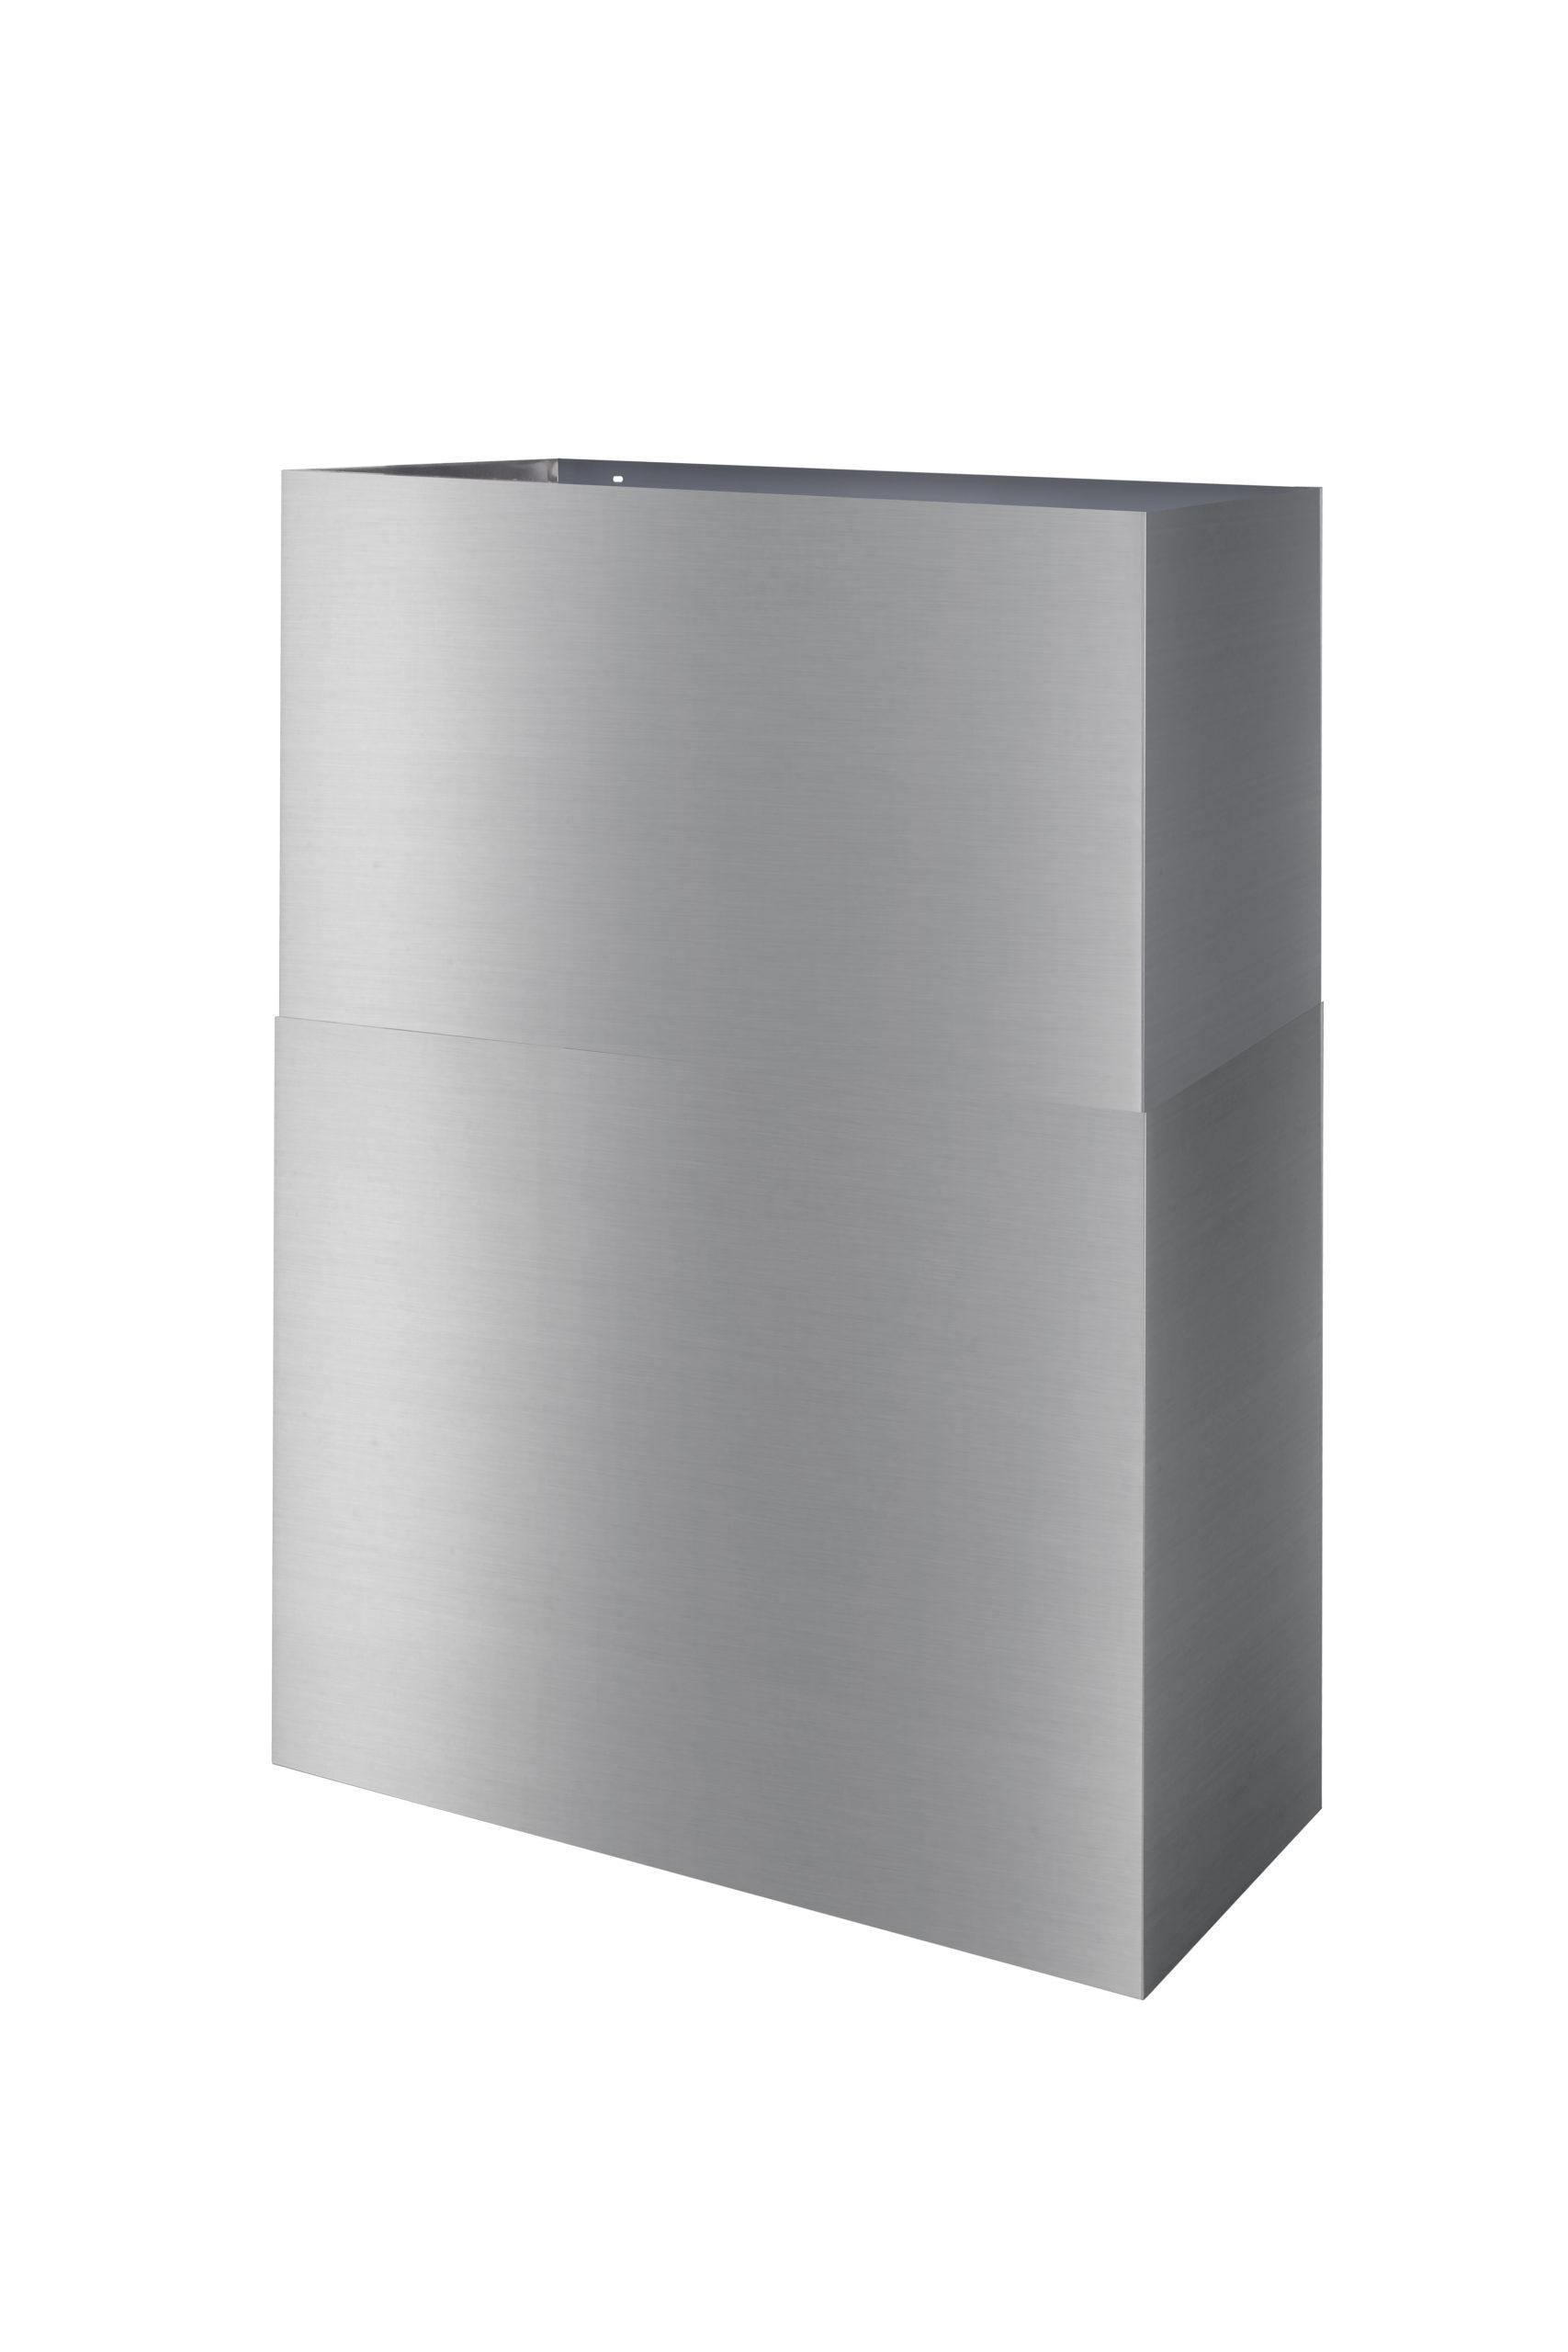 Thor Kitchen RHDC4856 48 Inch Duct Cover For Range Hood In Stainless Steel